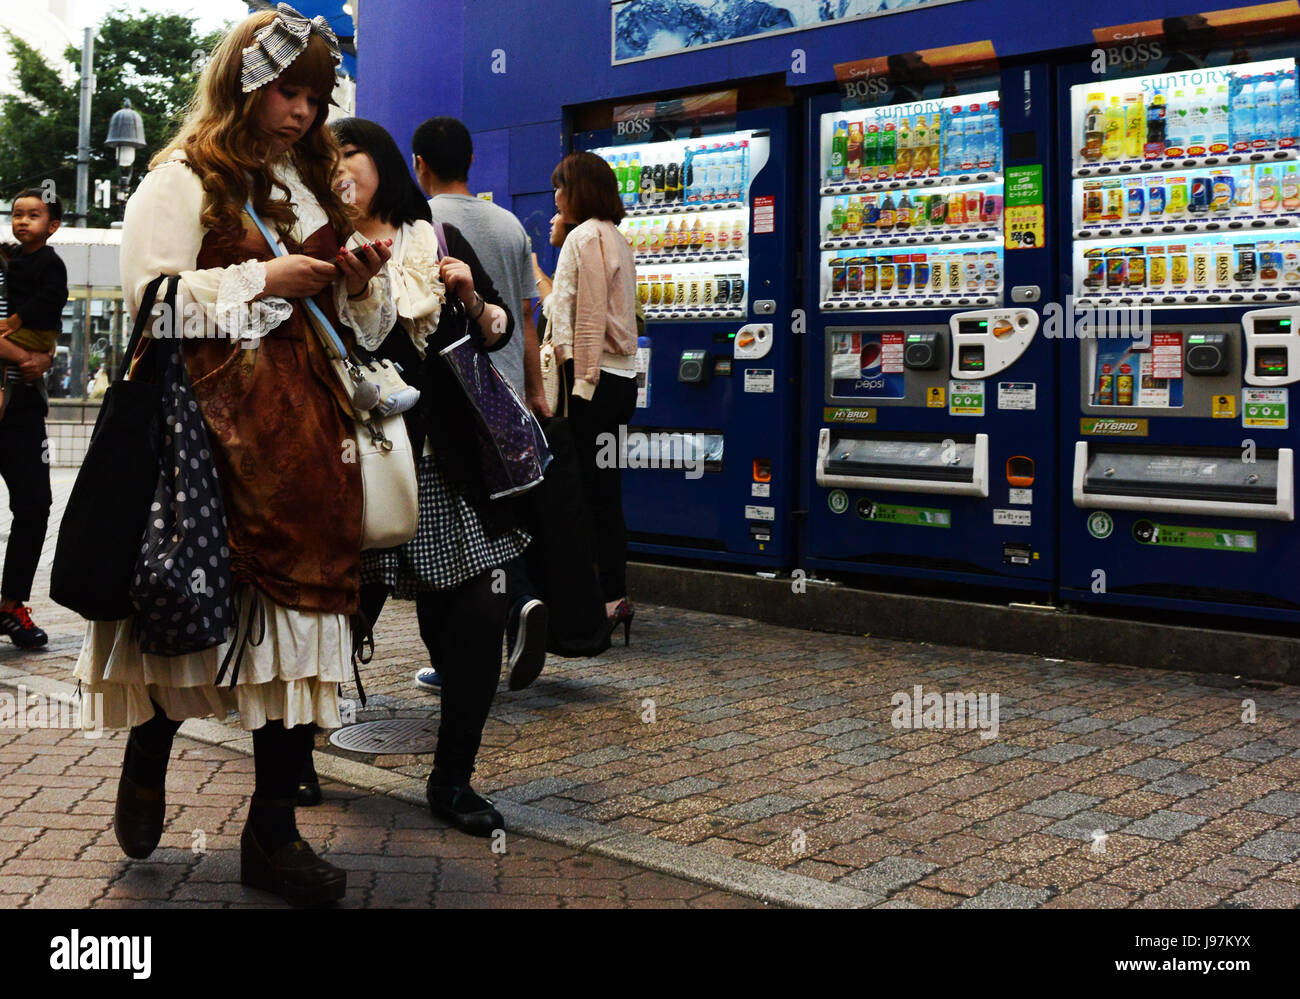 Shibuya is a very popular shopping , entertainment and nightlife area in Tokyo, Japan. Stock Photo